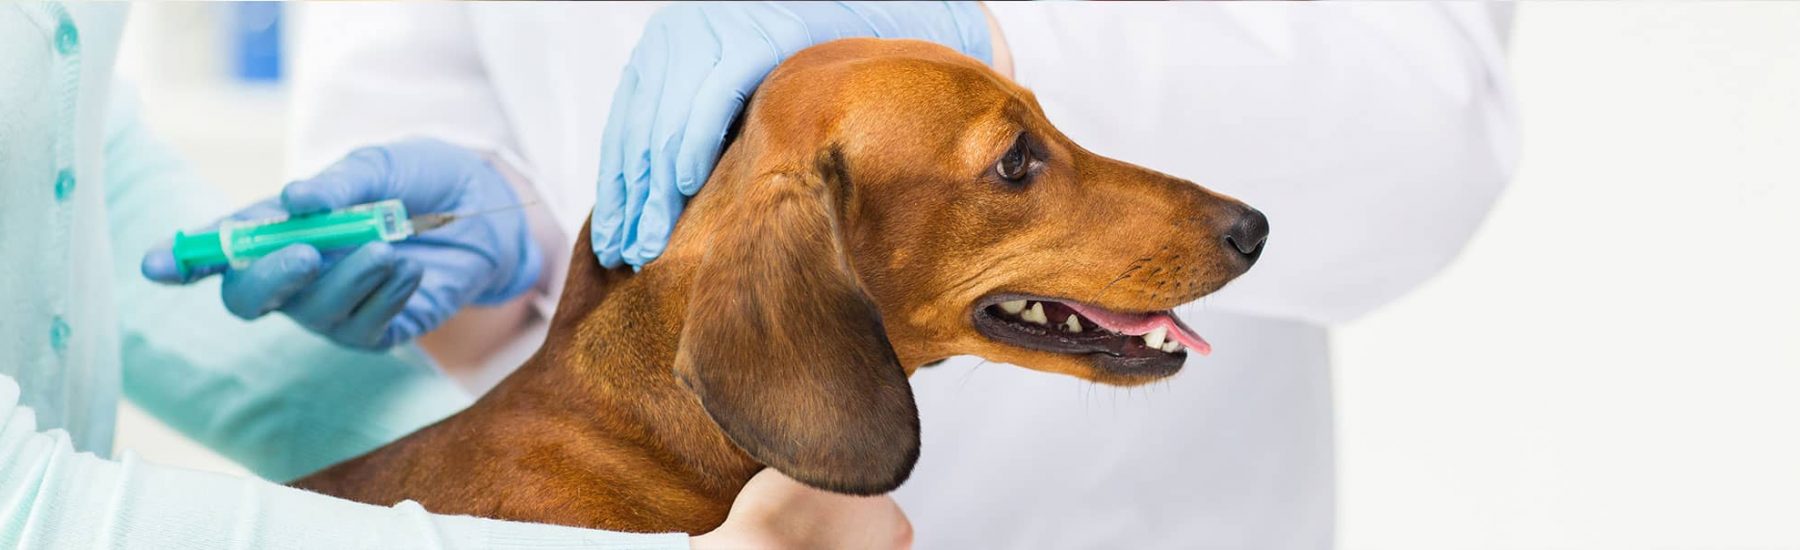 A brown dog getting a vaccination shot